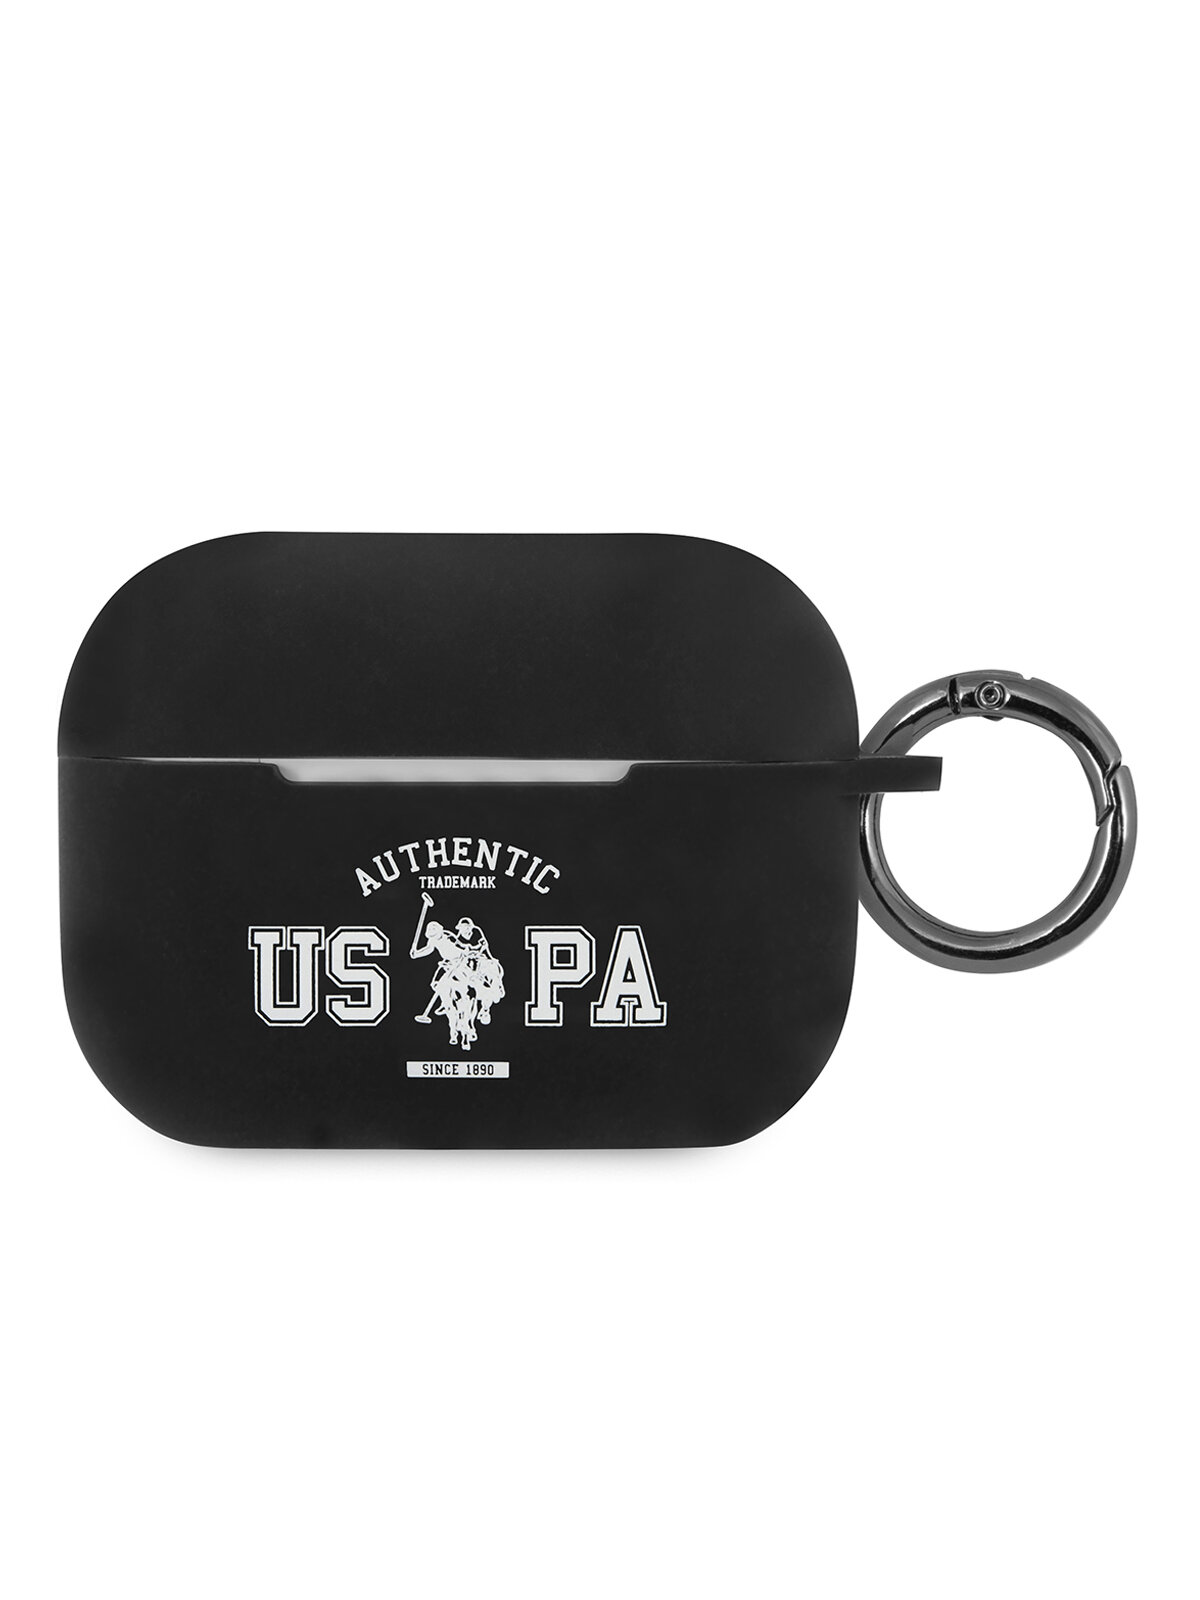 U.S. Polo Assn. для Airpods Pro чехол Silicone with ring Authentic Black